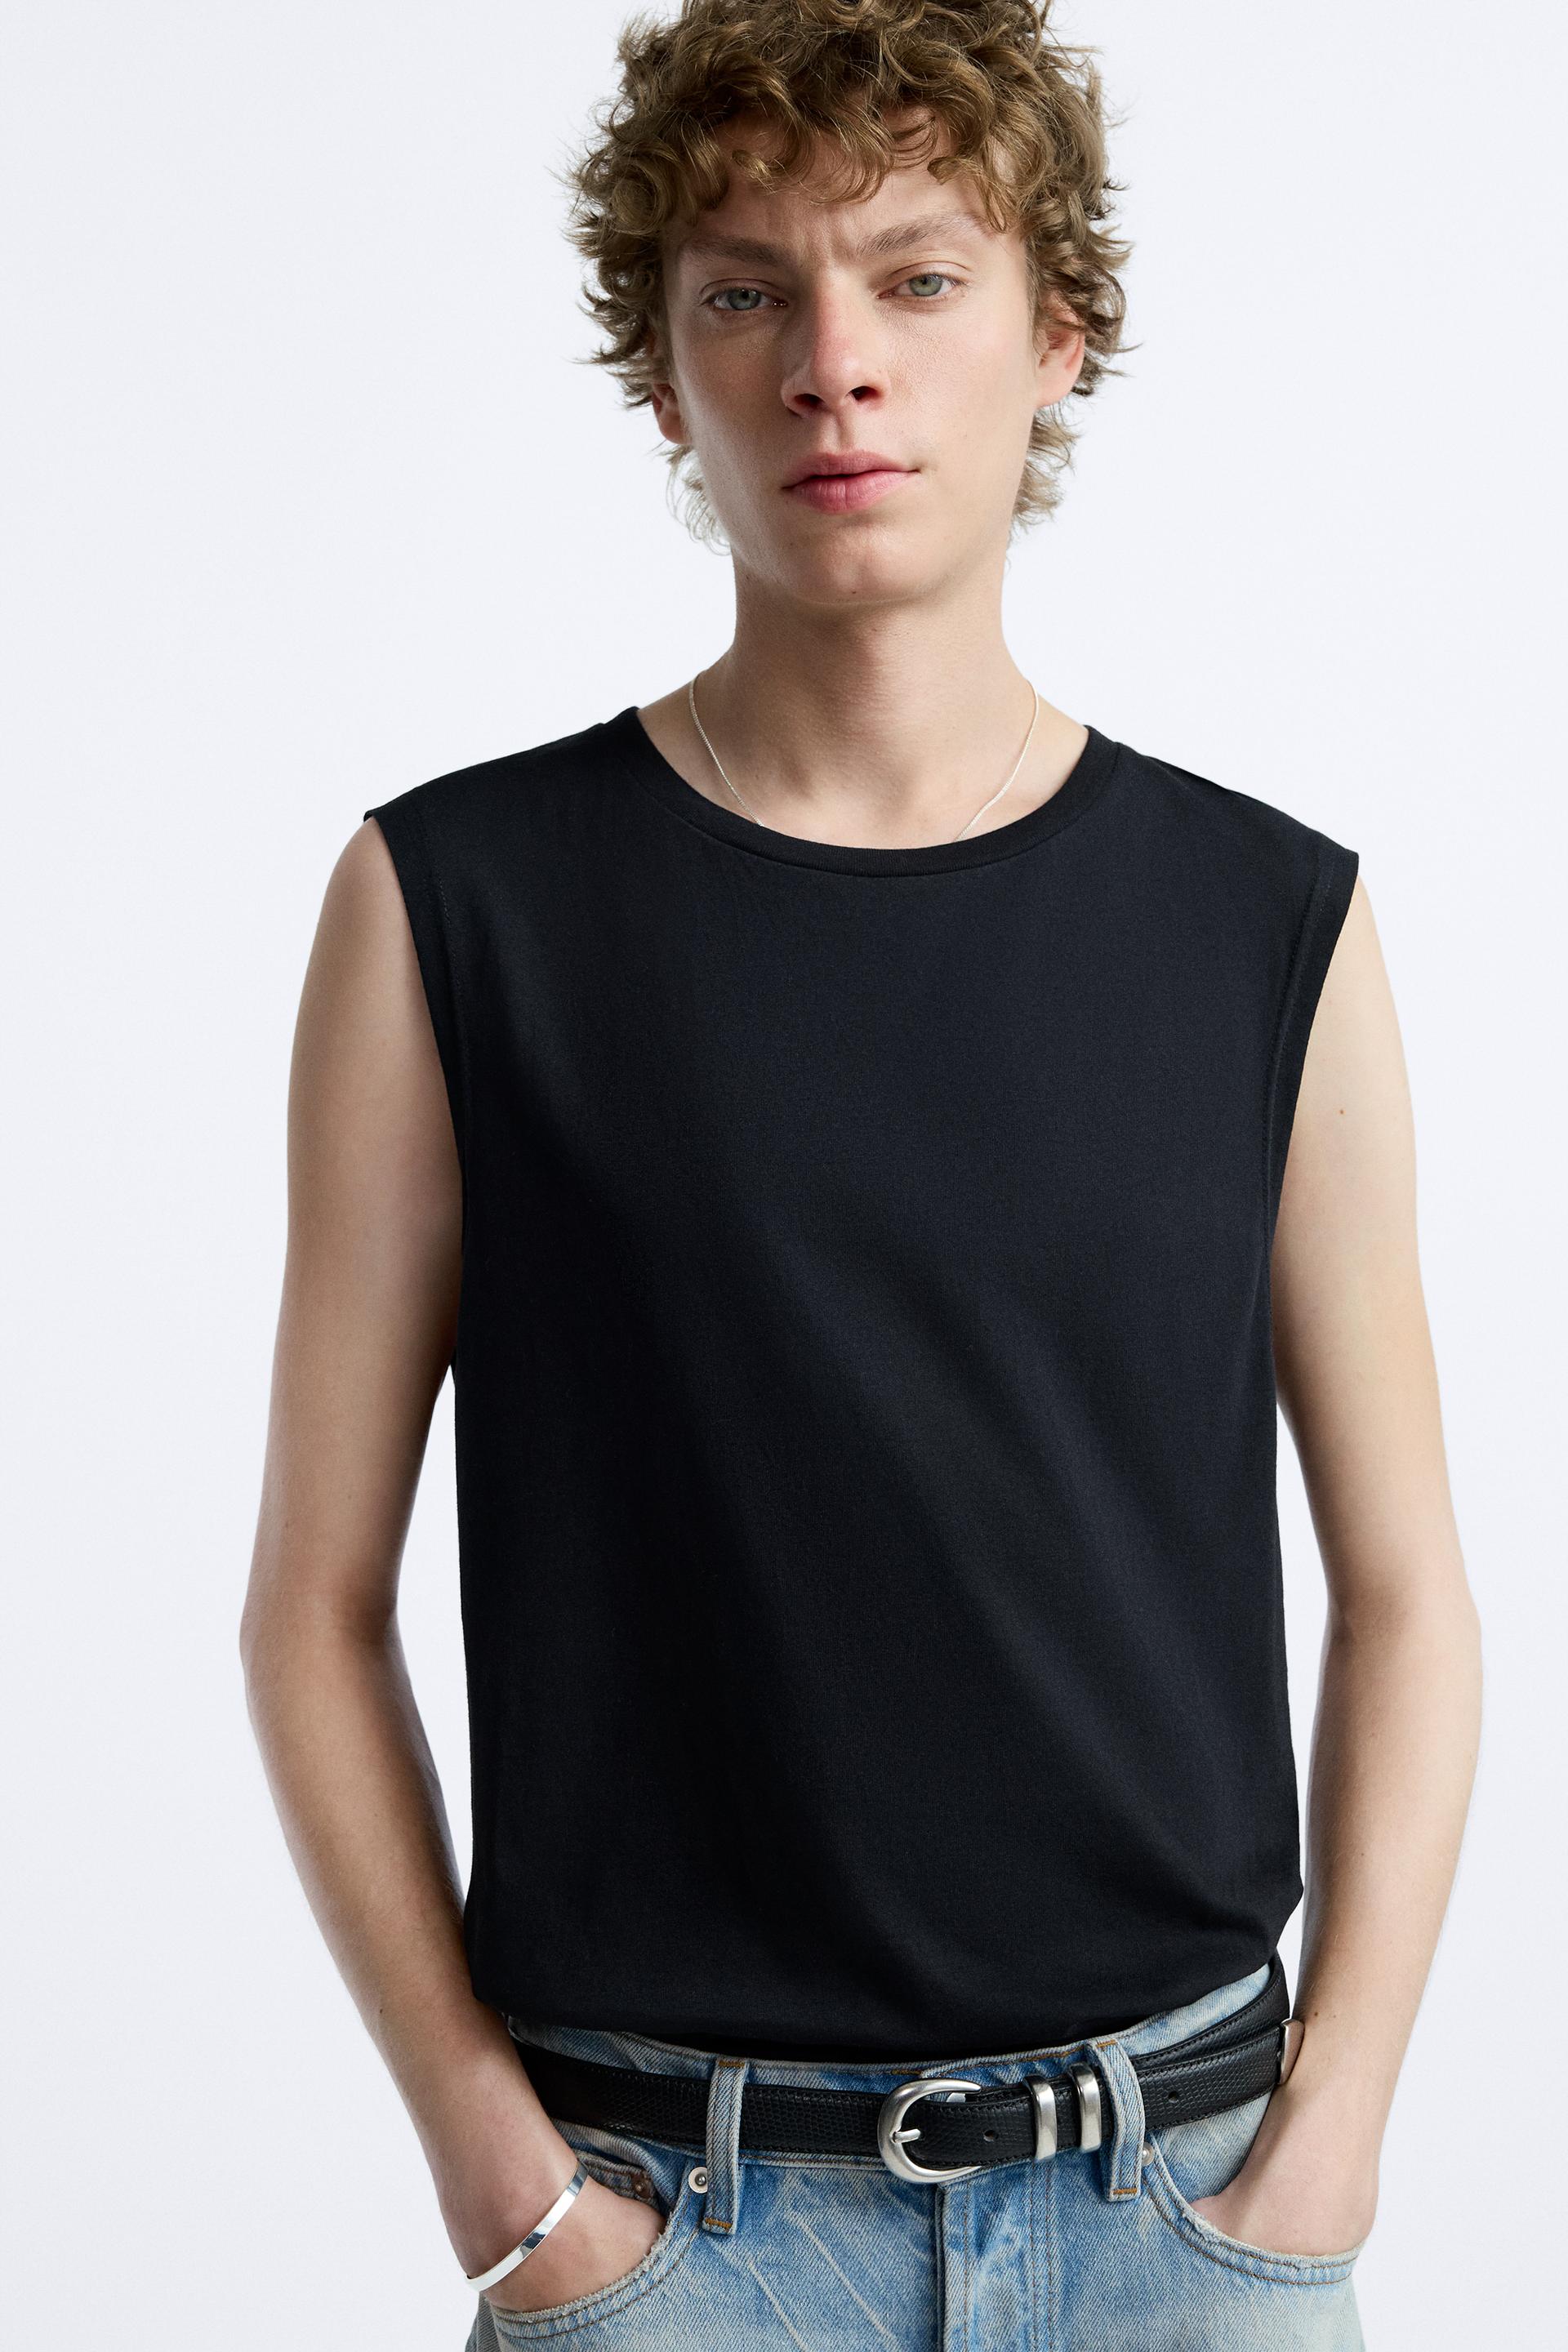 Men Sleeveless With Raw Edge And Contrast Raglan In White Black Tank Top  Wholesale Manufacturer & Exporters Textile & Fashion Leather Clothing Goods  with we have provide customization Brand your own